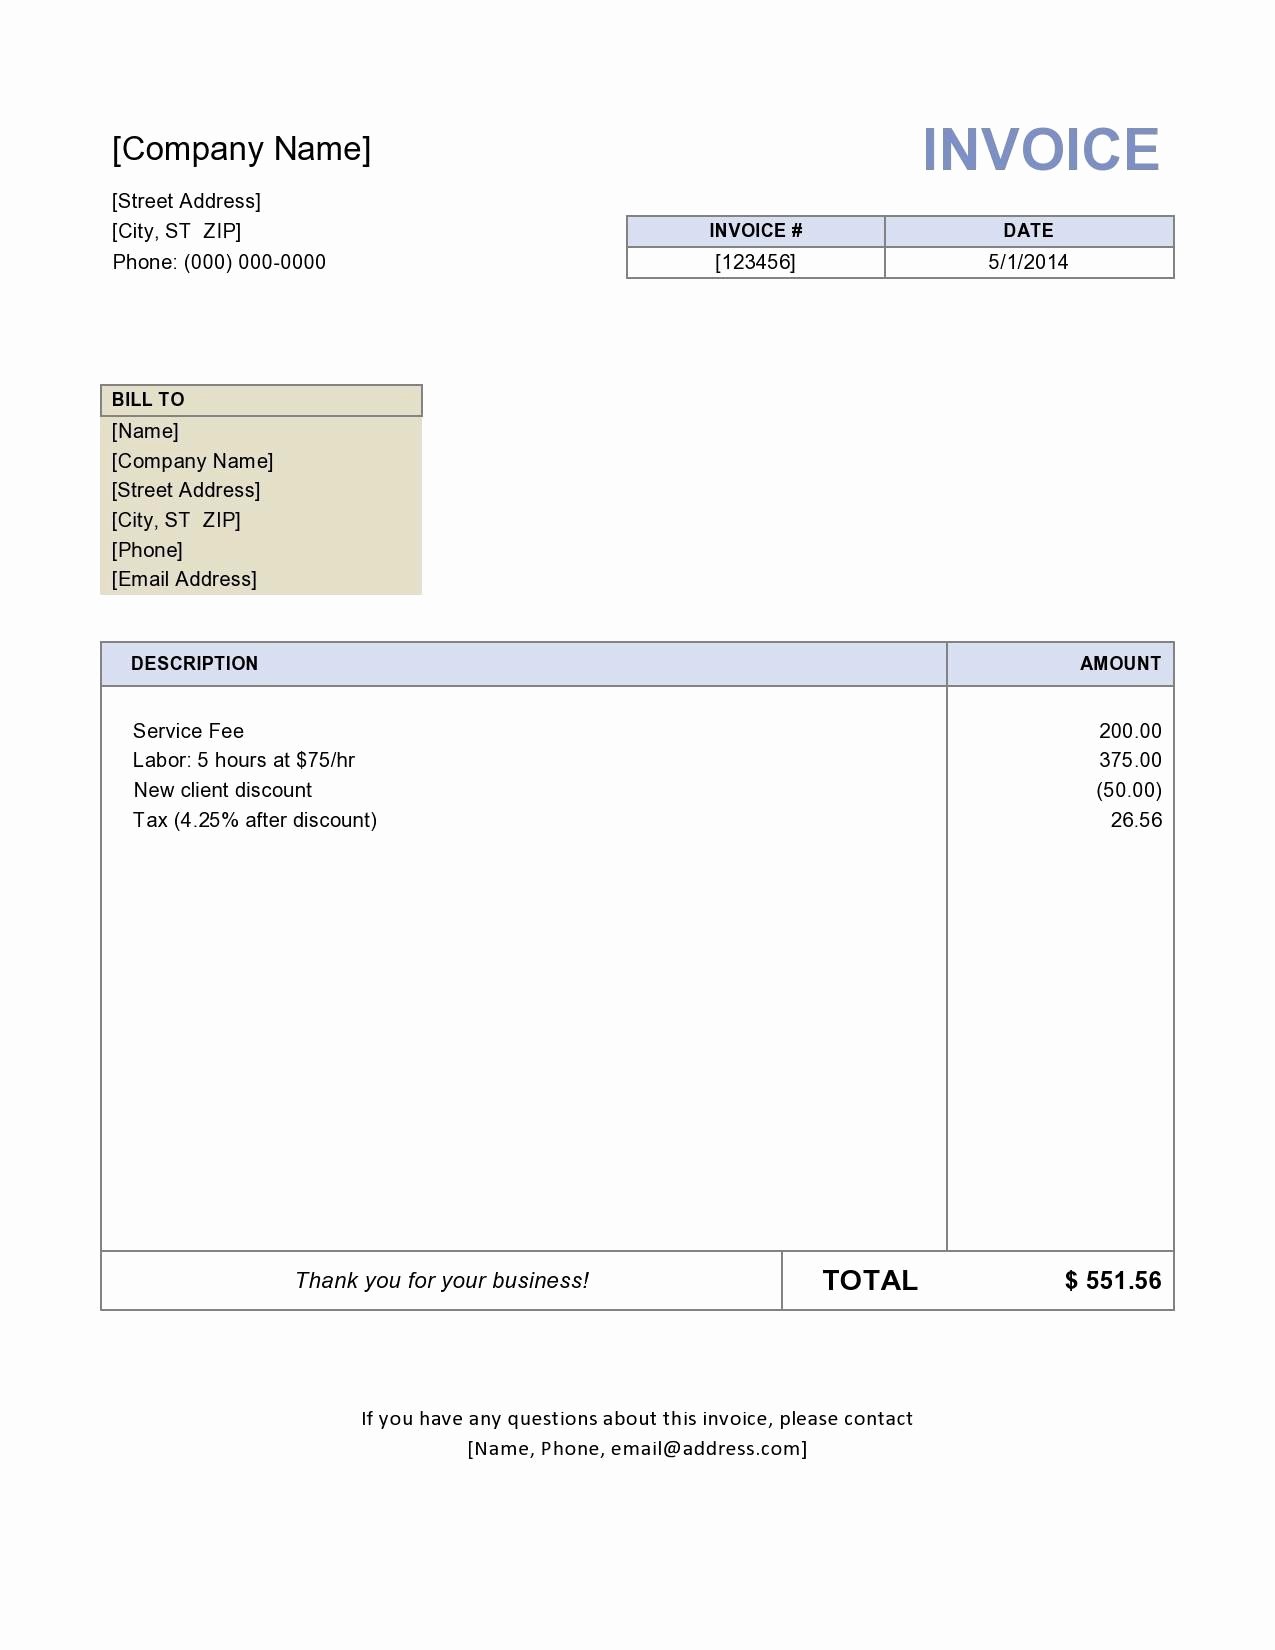 Consulting Invoice Template Word Awesome Consulting Invoice Template Word now is the Time for You